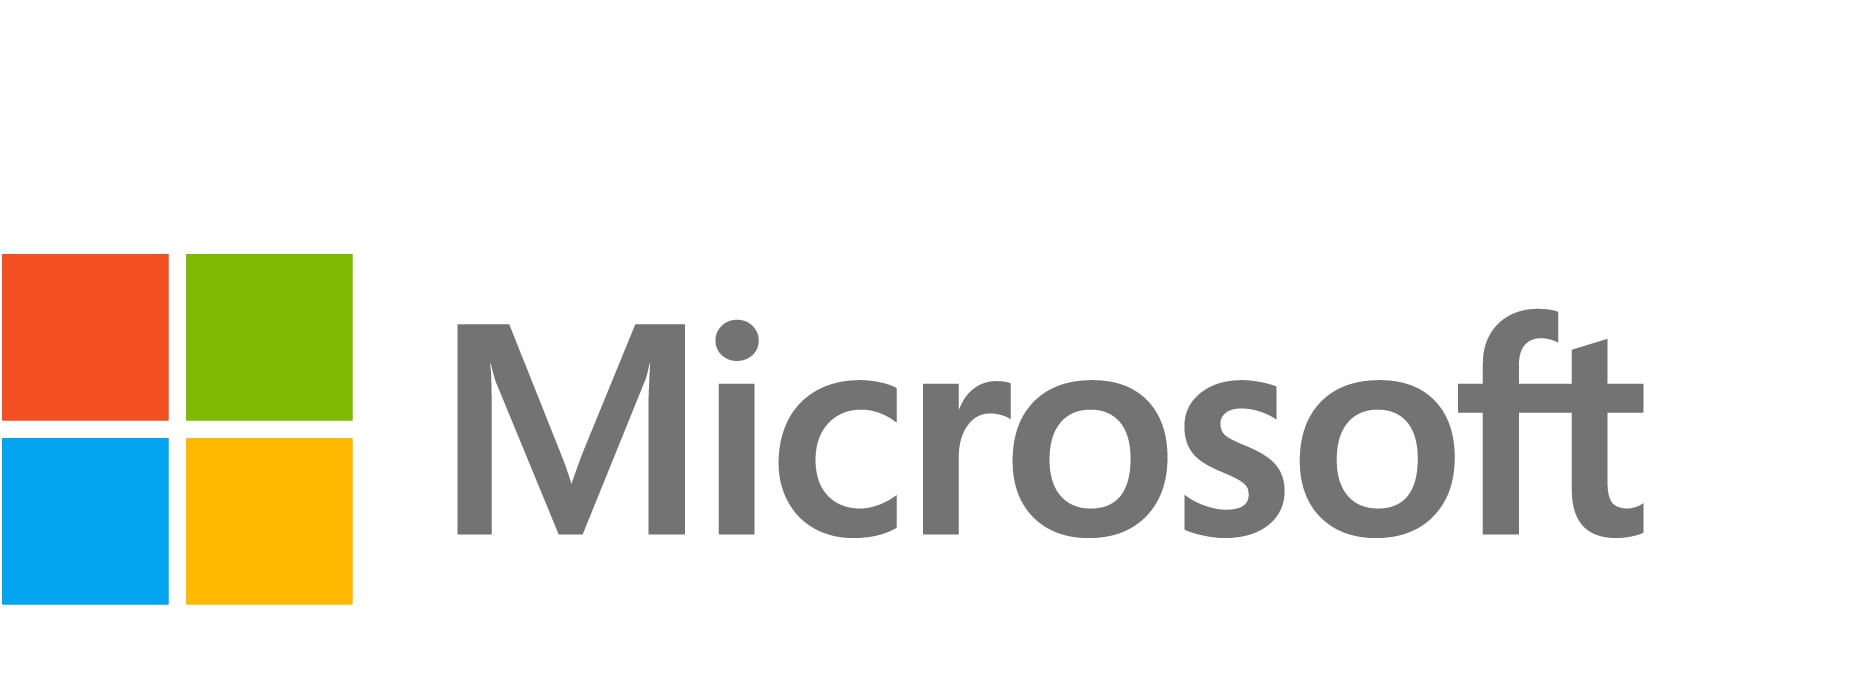 Microsoft Power Pages - subscription license (1 year) - 500 anonymous users per web site